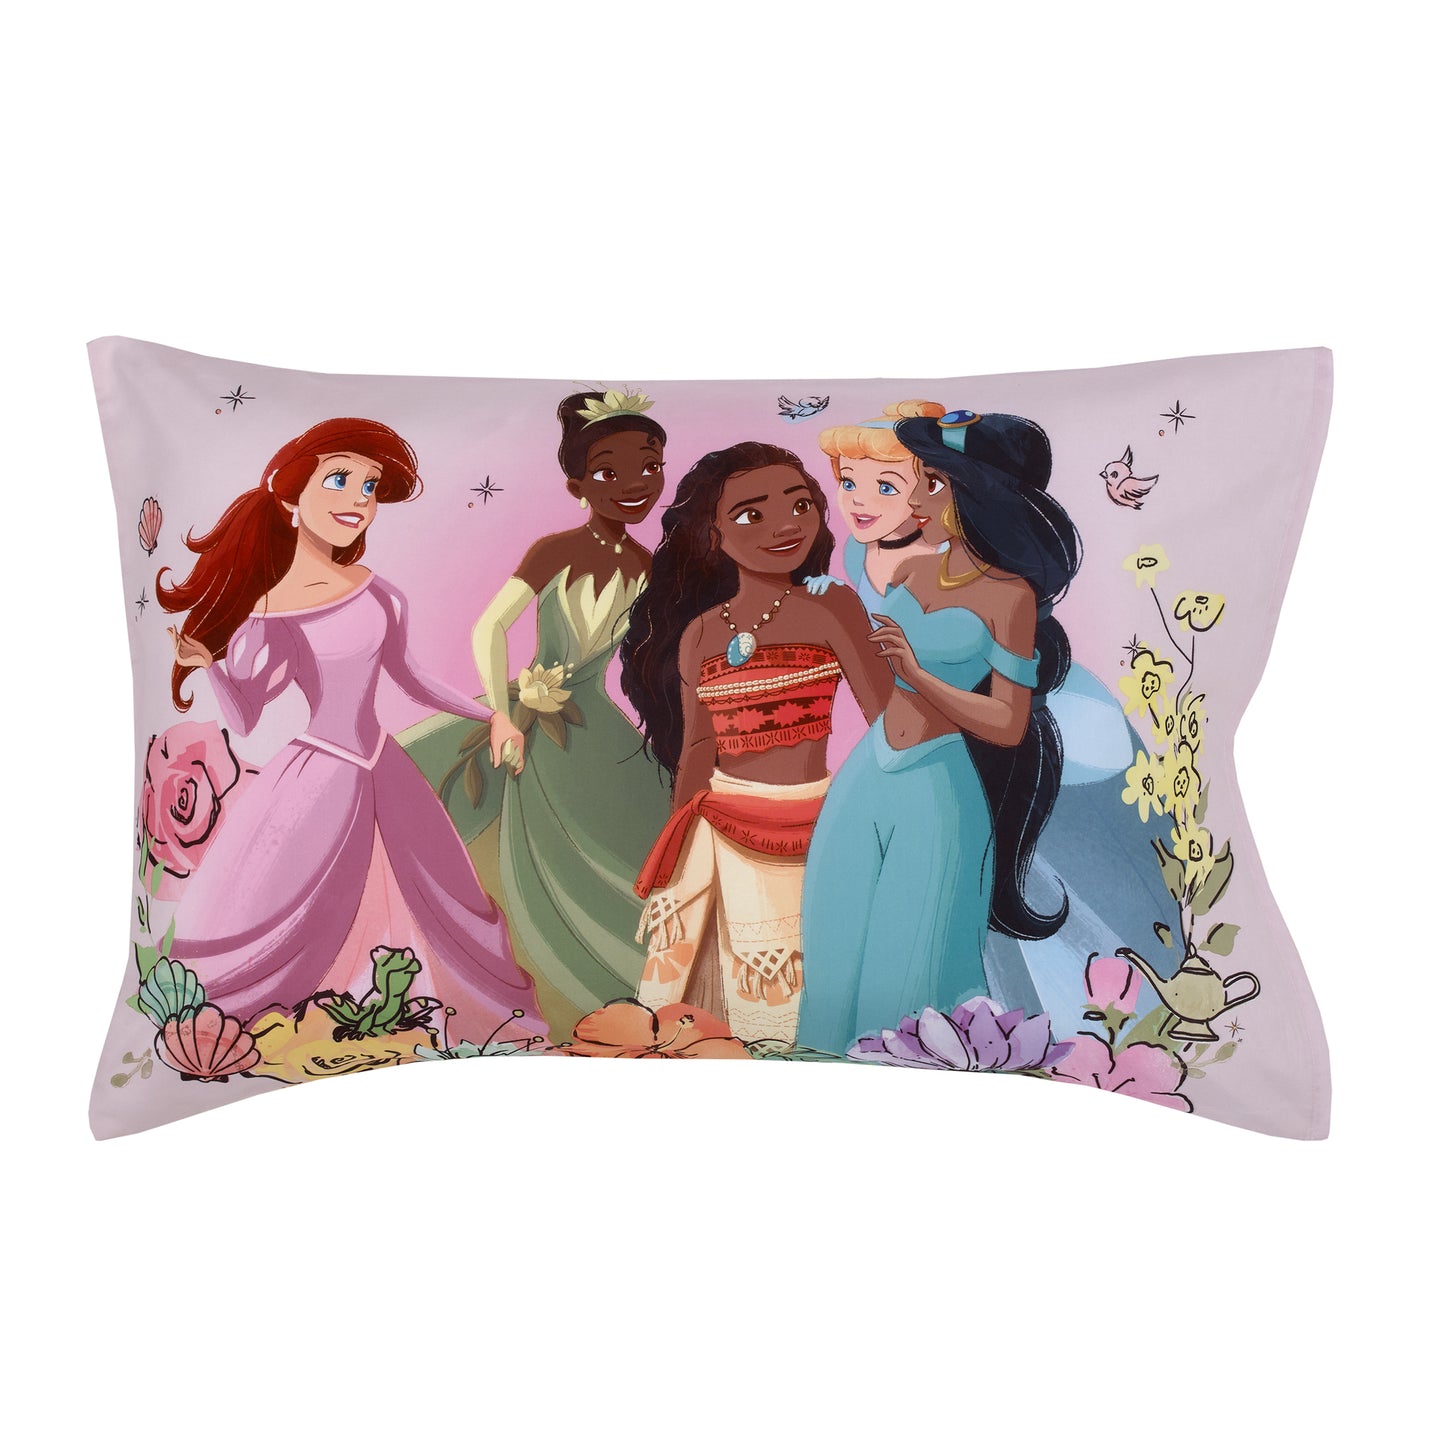 Disney Princesses Courage and Kindness Pink, Blue, and White, Rapunzel, Ariel, Tiana, Moana, Jasmine, Cinderella, Mulan, Belle, and Snow White 4 Piece Toddler Bed Set - Comforter, Fitted Bottom Sheet, Flat Top Sheet, and Reversible Pillowcase